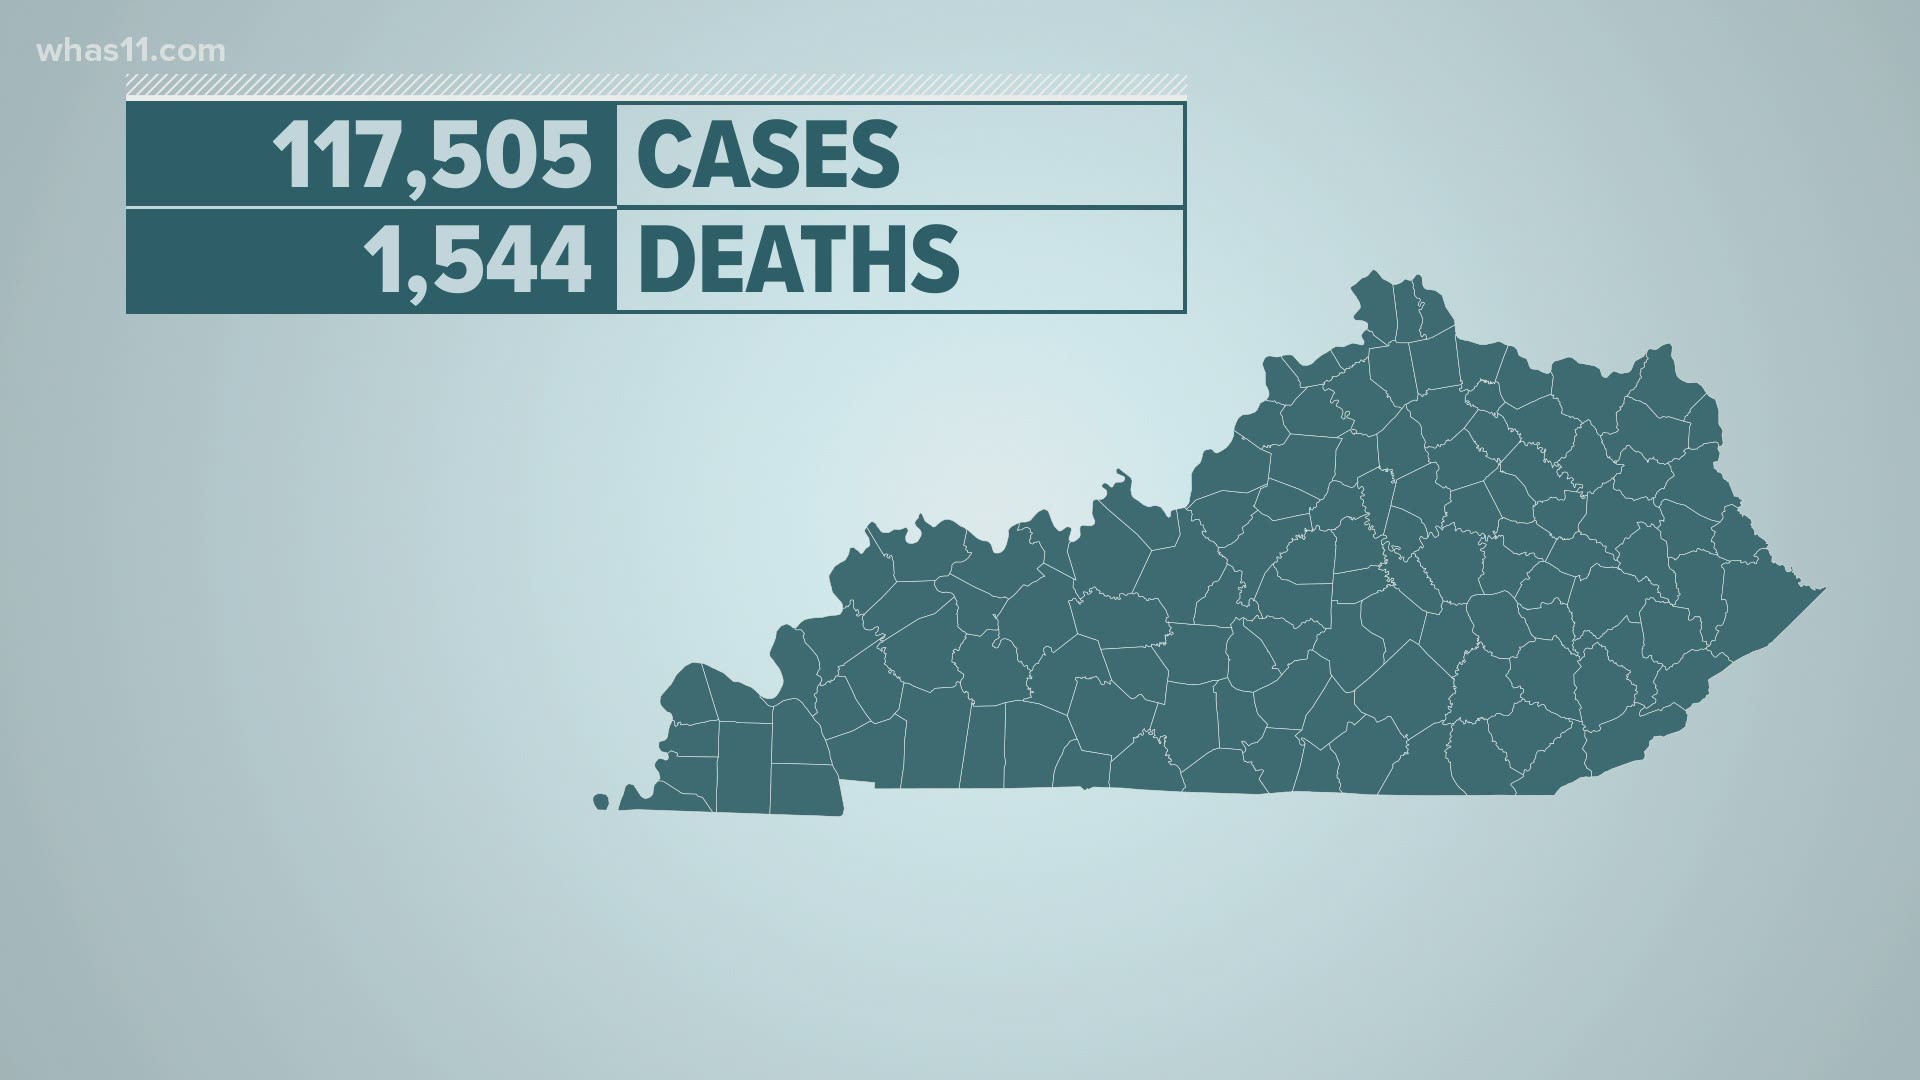 Kentucky has confirmed more then 117,000 cases overall.